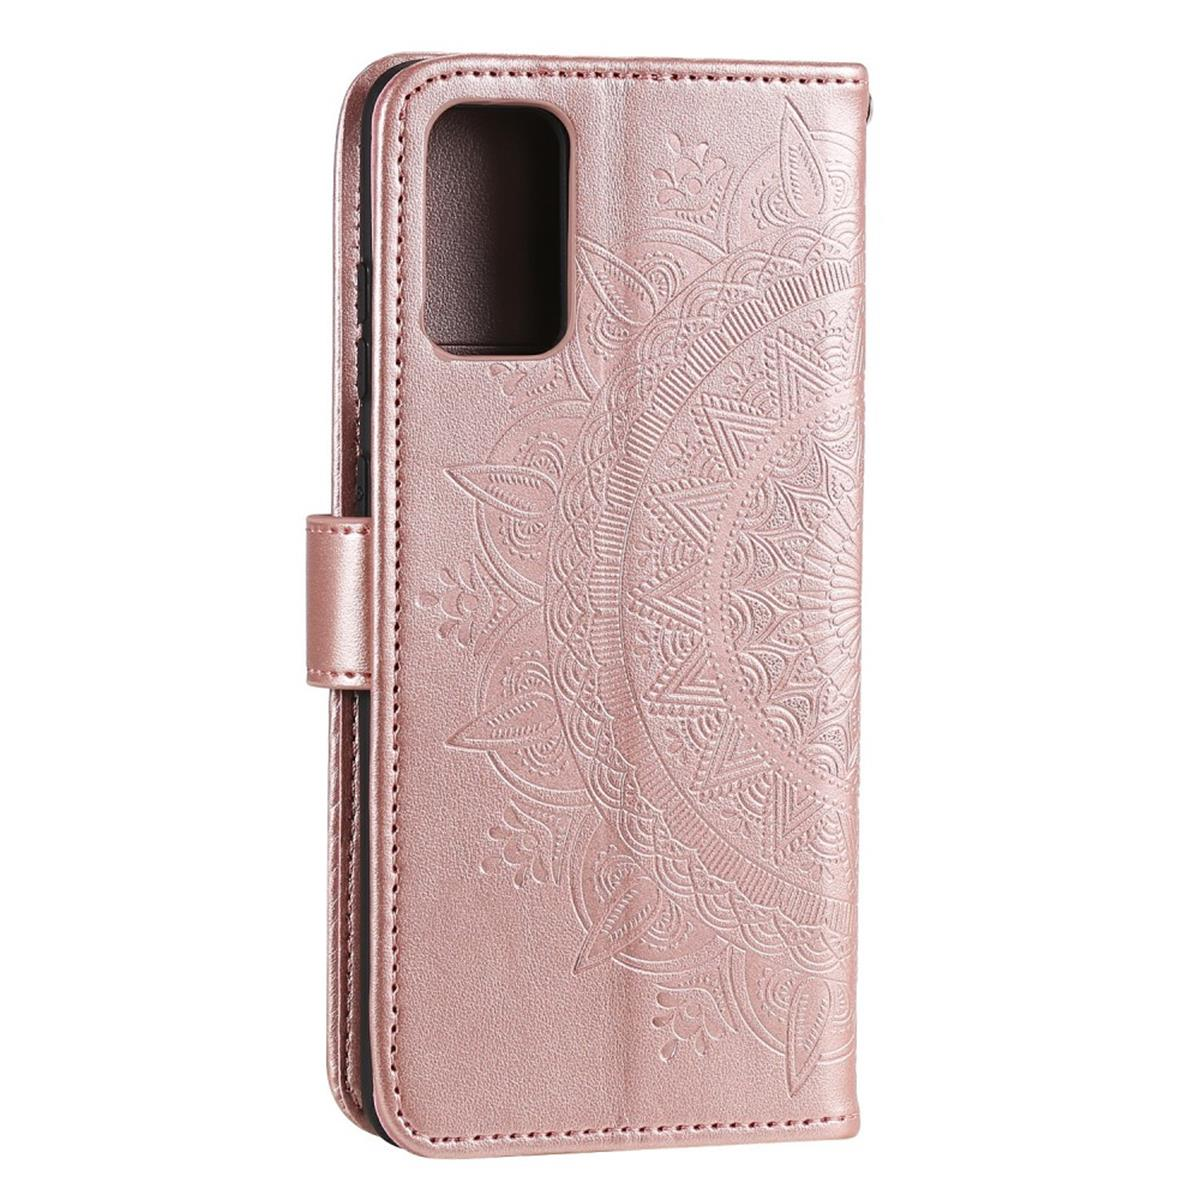 COVERKINGZ Klapphülle mit Mandala Samsung, Roségold Muster, Bookcover, 5G, A52/A52 Galaxy 5G/A52s